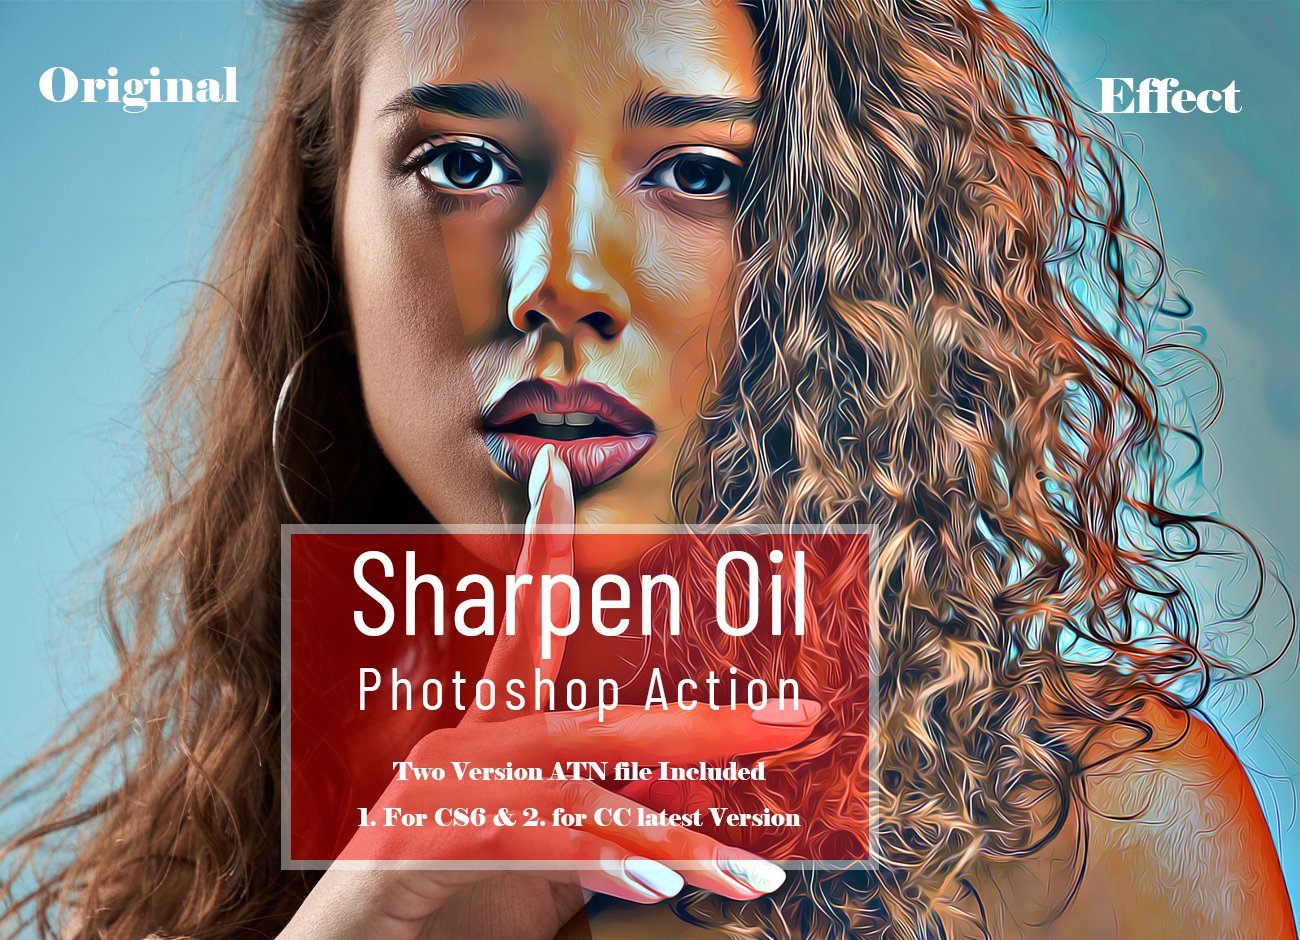 Sharpen Oil Photoshop Actioncover image.